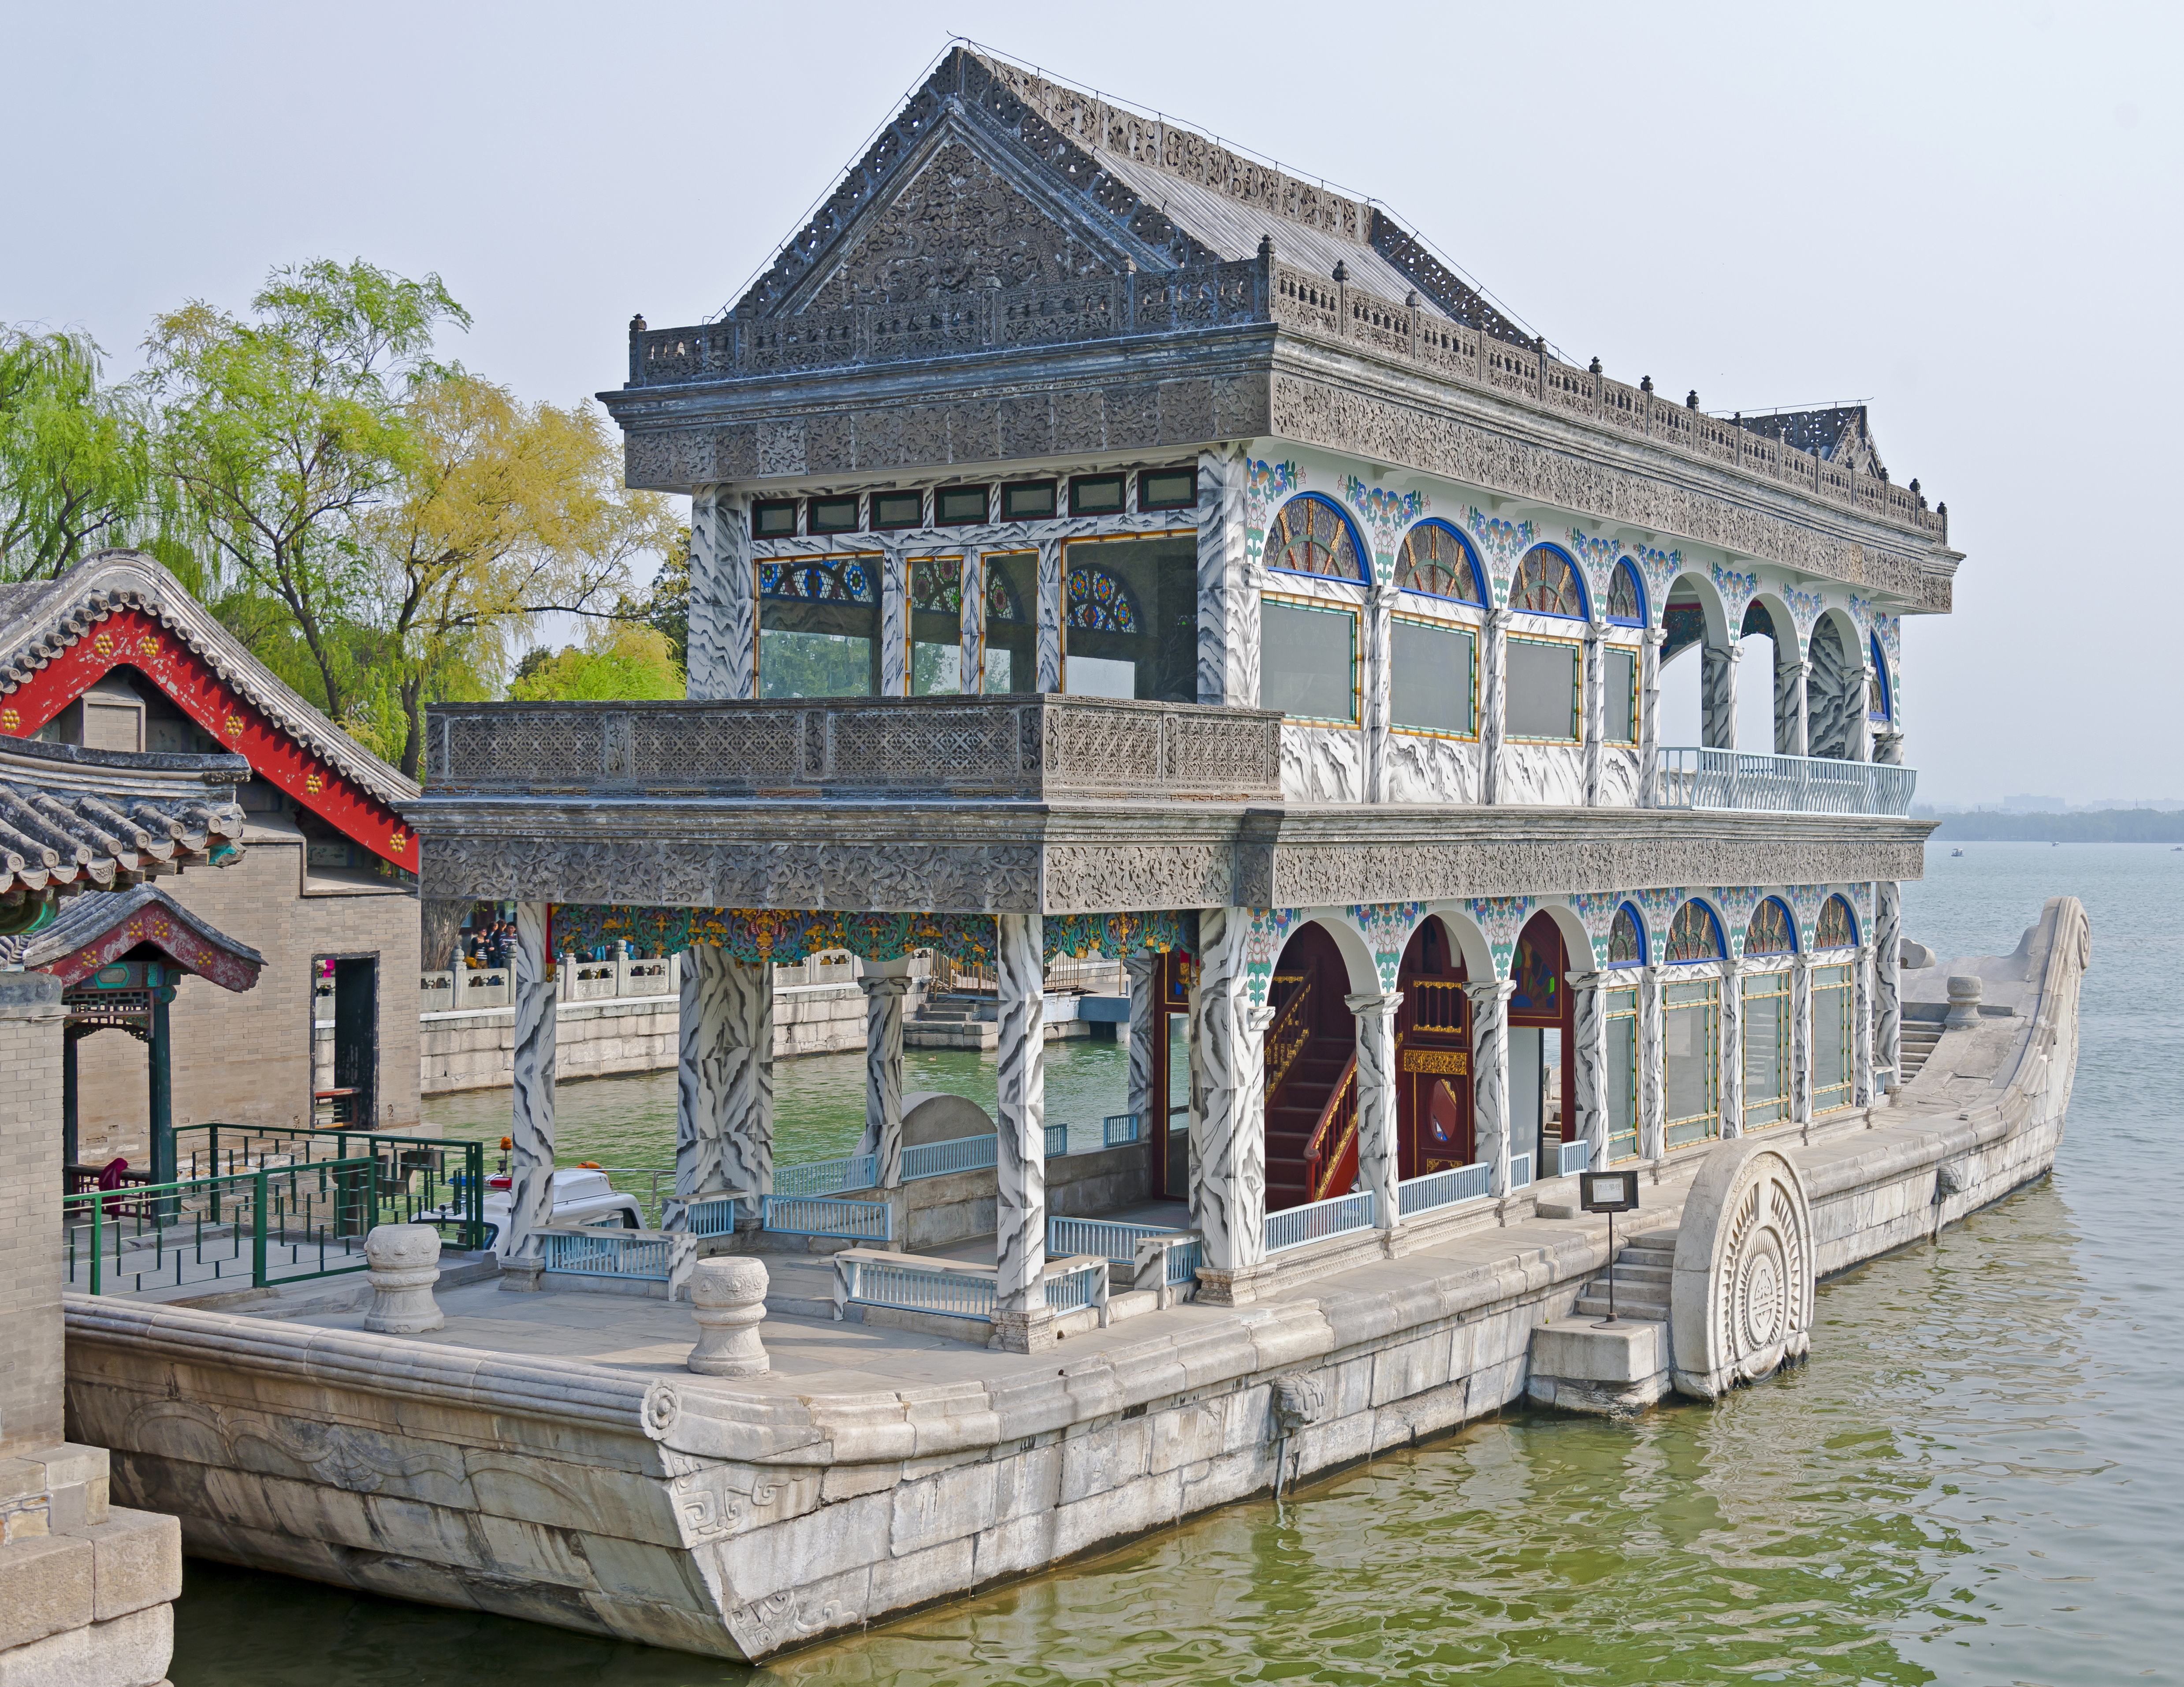 Marble Boat from stern, Summer Palace, Beijing